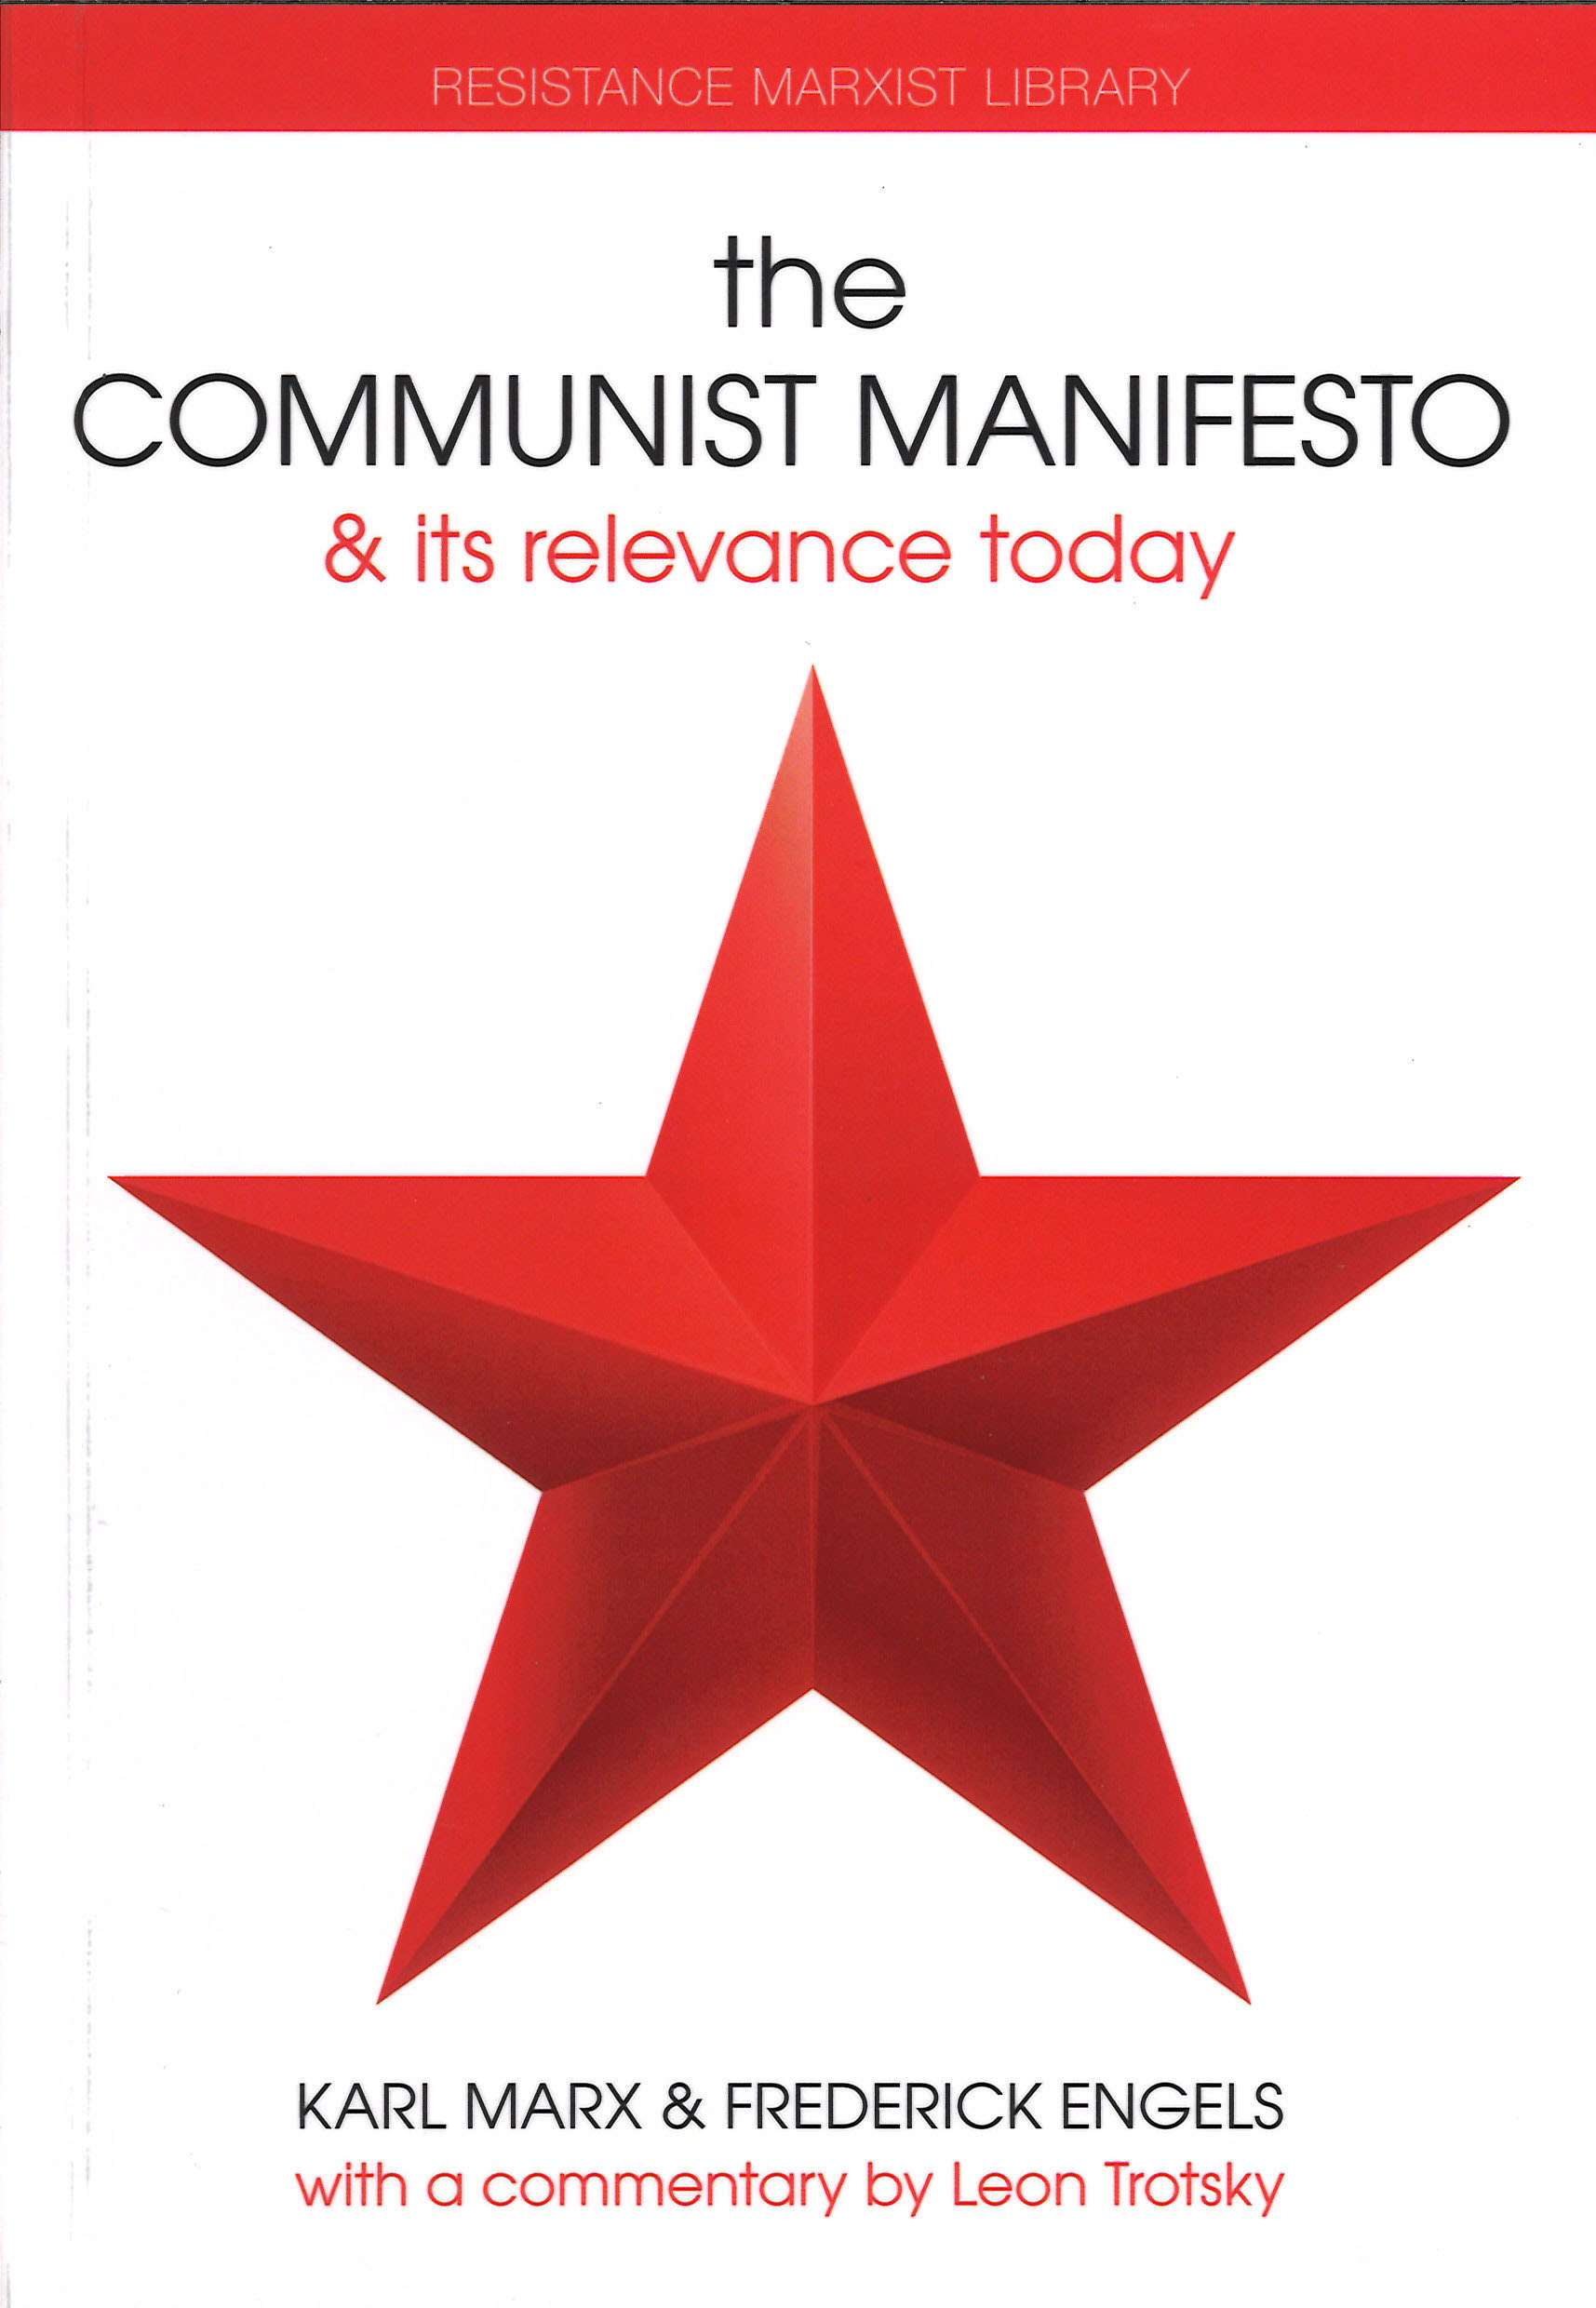 An introduction to the communist manifesto by karl marx